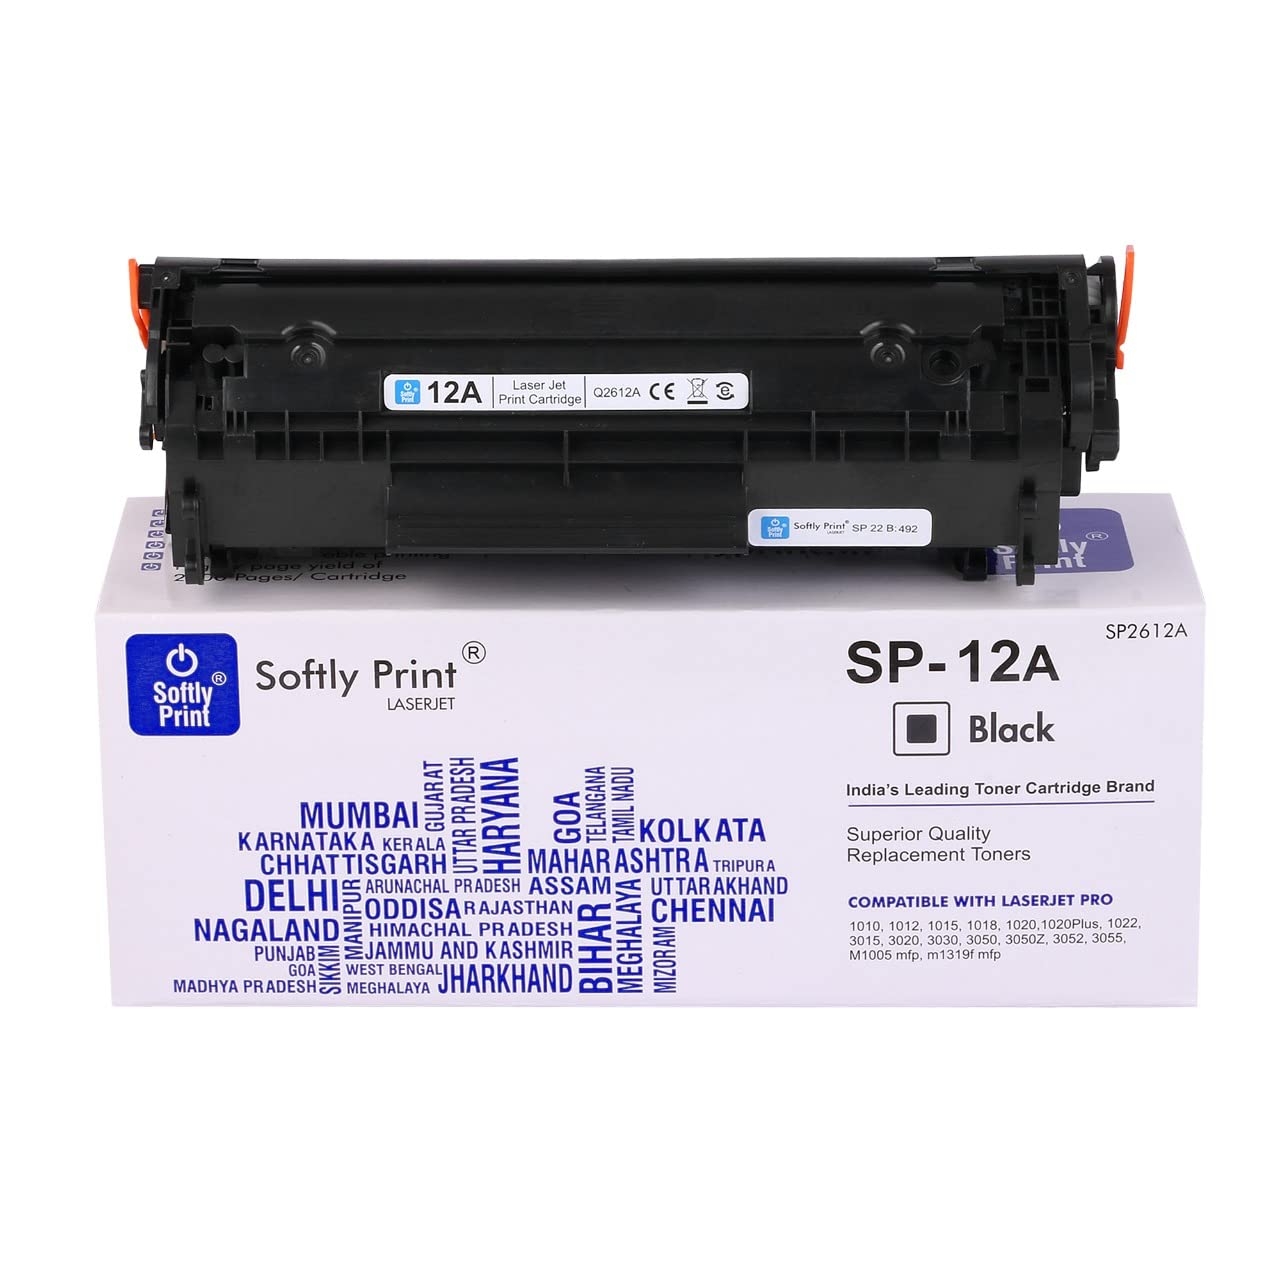 12A Toner Cartridge for HP Q2612A High Yield for HP Laserjet M1005 MFP/1020/1010/1012/1018/1022/1022n/1022NW/3015/3020/3030/3050/3050z/3052/3055/M1319/M1319F MFP